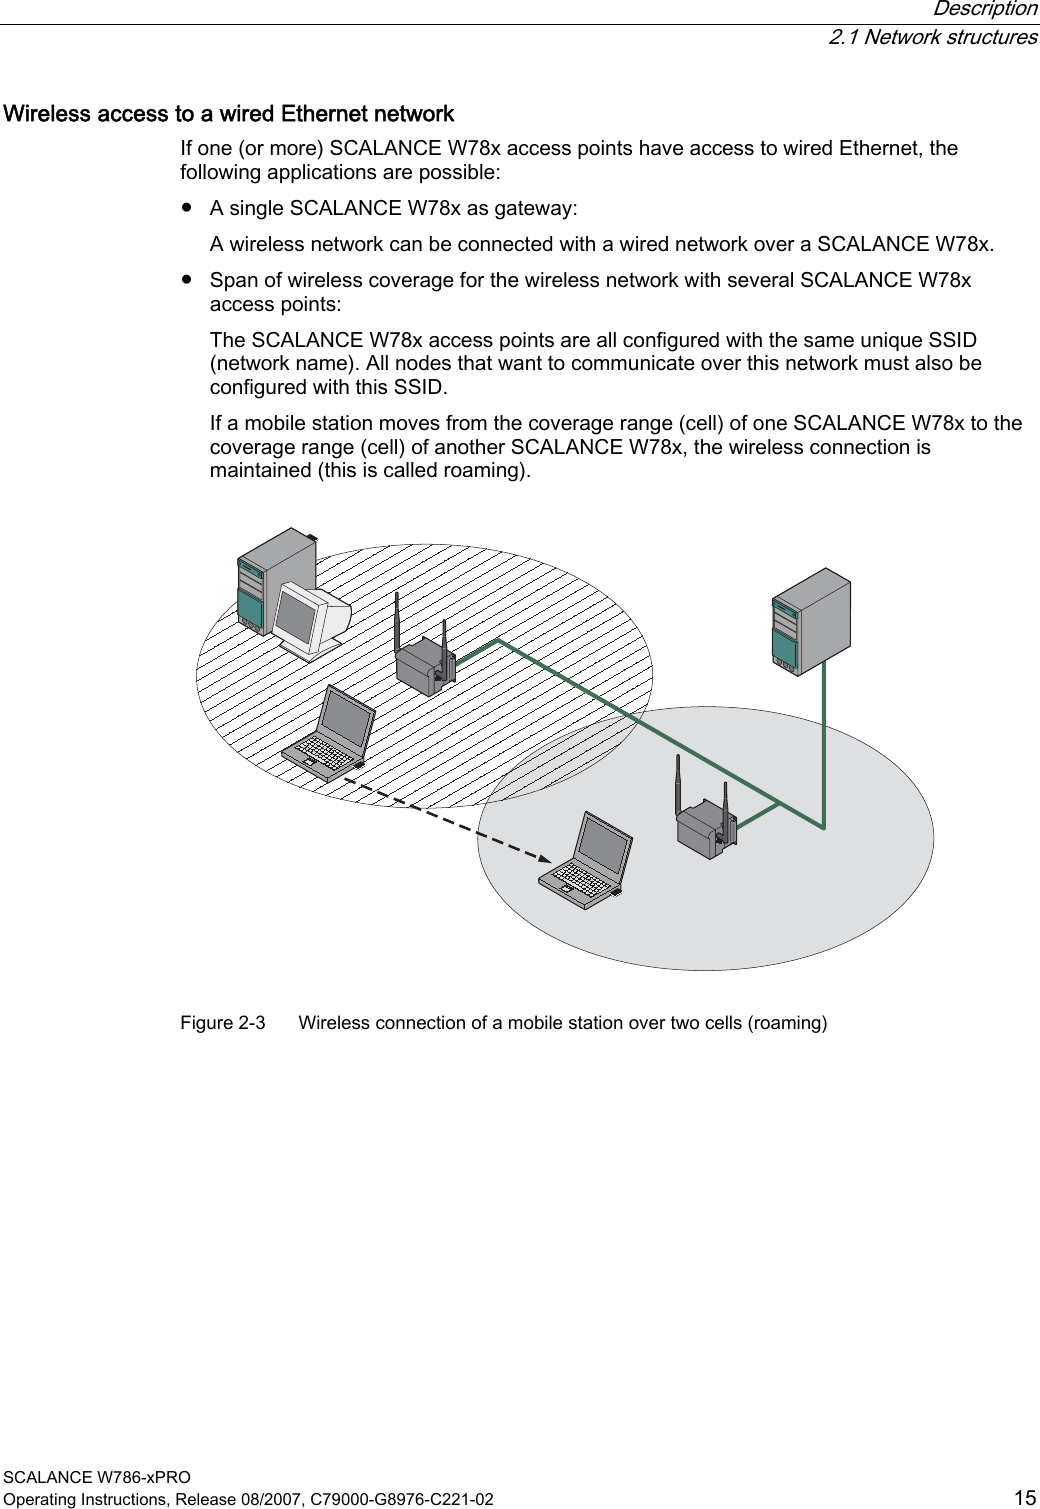  Description  2.1 Network structures SCALANCE W786-xPRO Operating Instructions, Release 08/2007, C79000-G8976-C221-02  15 Wireless access to a wired Ethernet network If one (or more) SCALANCE W78x access points have access to wired Ethernet, the following applications are possible: ● A single SCALANCE W78x as gateway: A wireless network can be connected with a wired network over a SCALANCE W78x. ● Span of wireless coverage for the wireless network with several SCALANCE W78x access points: The SCALANCE W78x access points are all configured with the same unique SSID (network name). All nodes that want to communicate over this network must also be configured with this SSID. If a mobile station moves from the coverage range (cell) of one SCALANCE W78x to the coverage range (cell) of another SCALANCE W78x, the wireless connection is maintained (this is called roaming).  Figure 2-3  Wireless connection of a mobile station over two cells (roaming) 